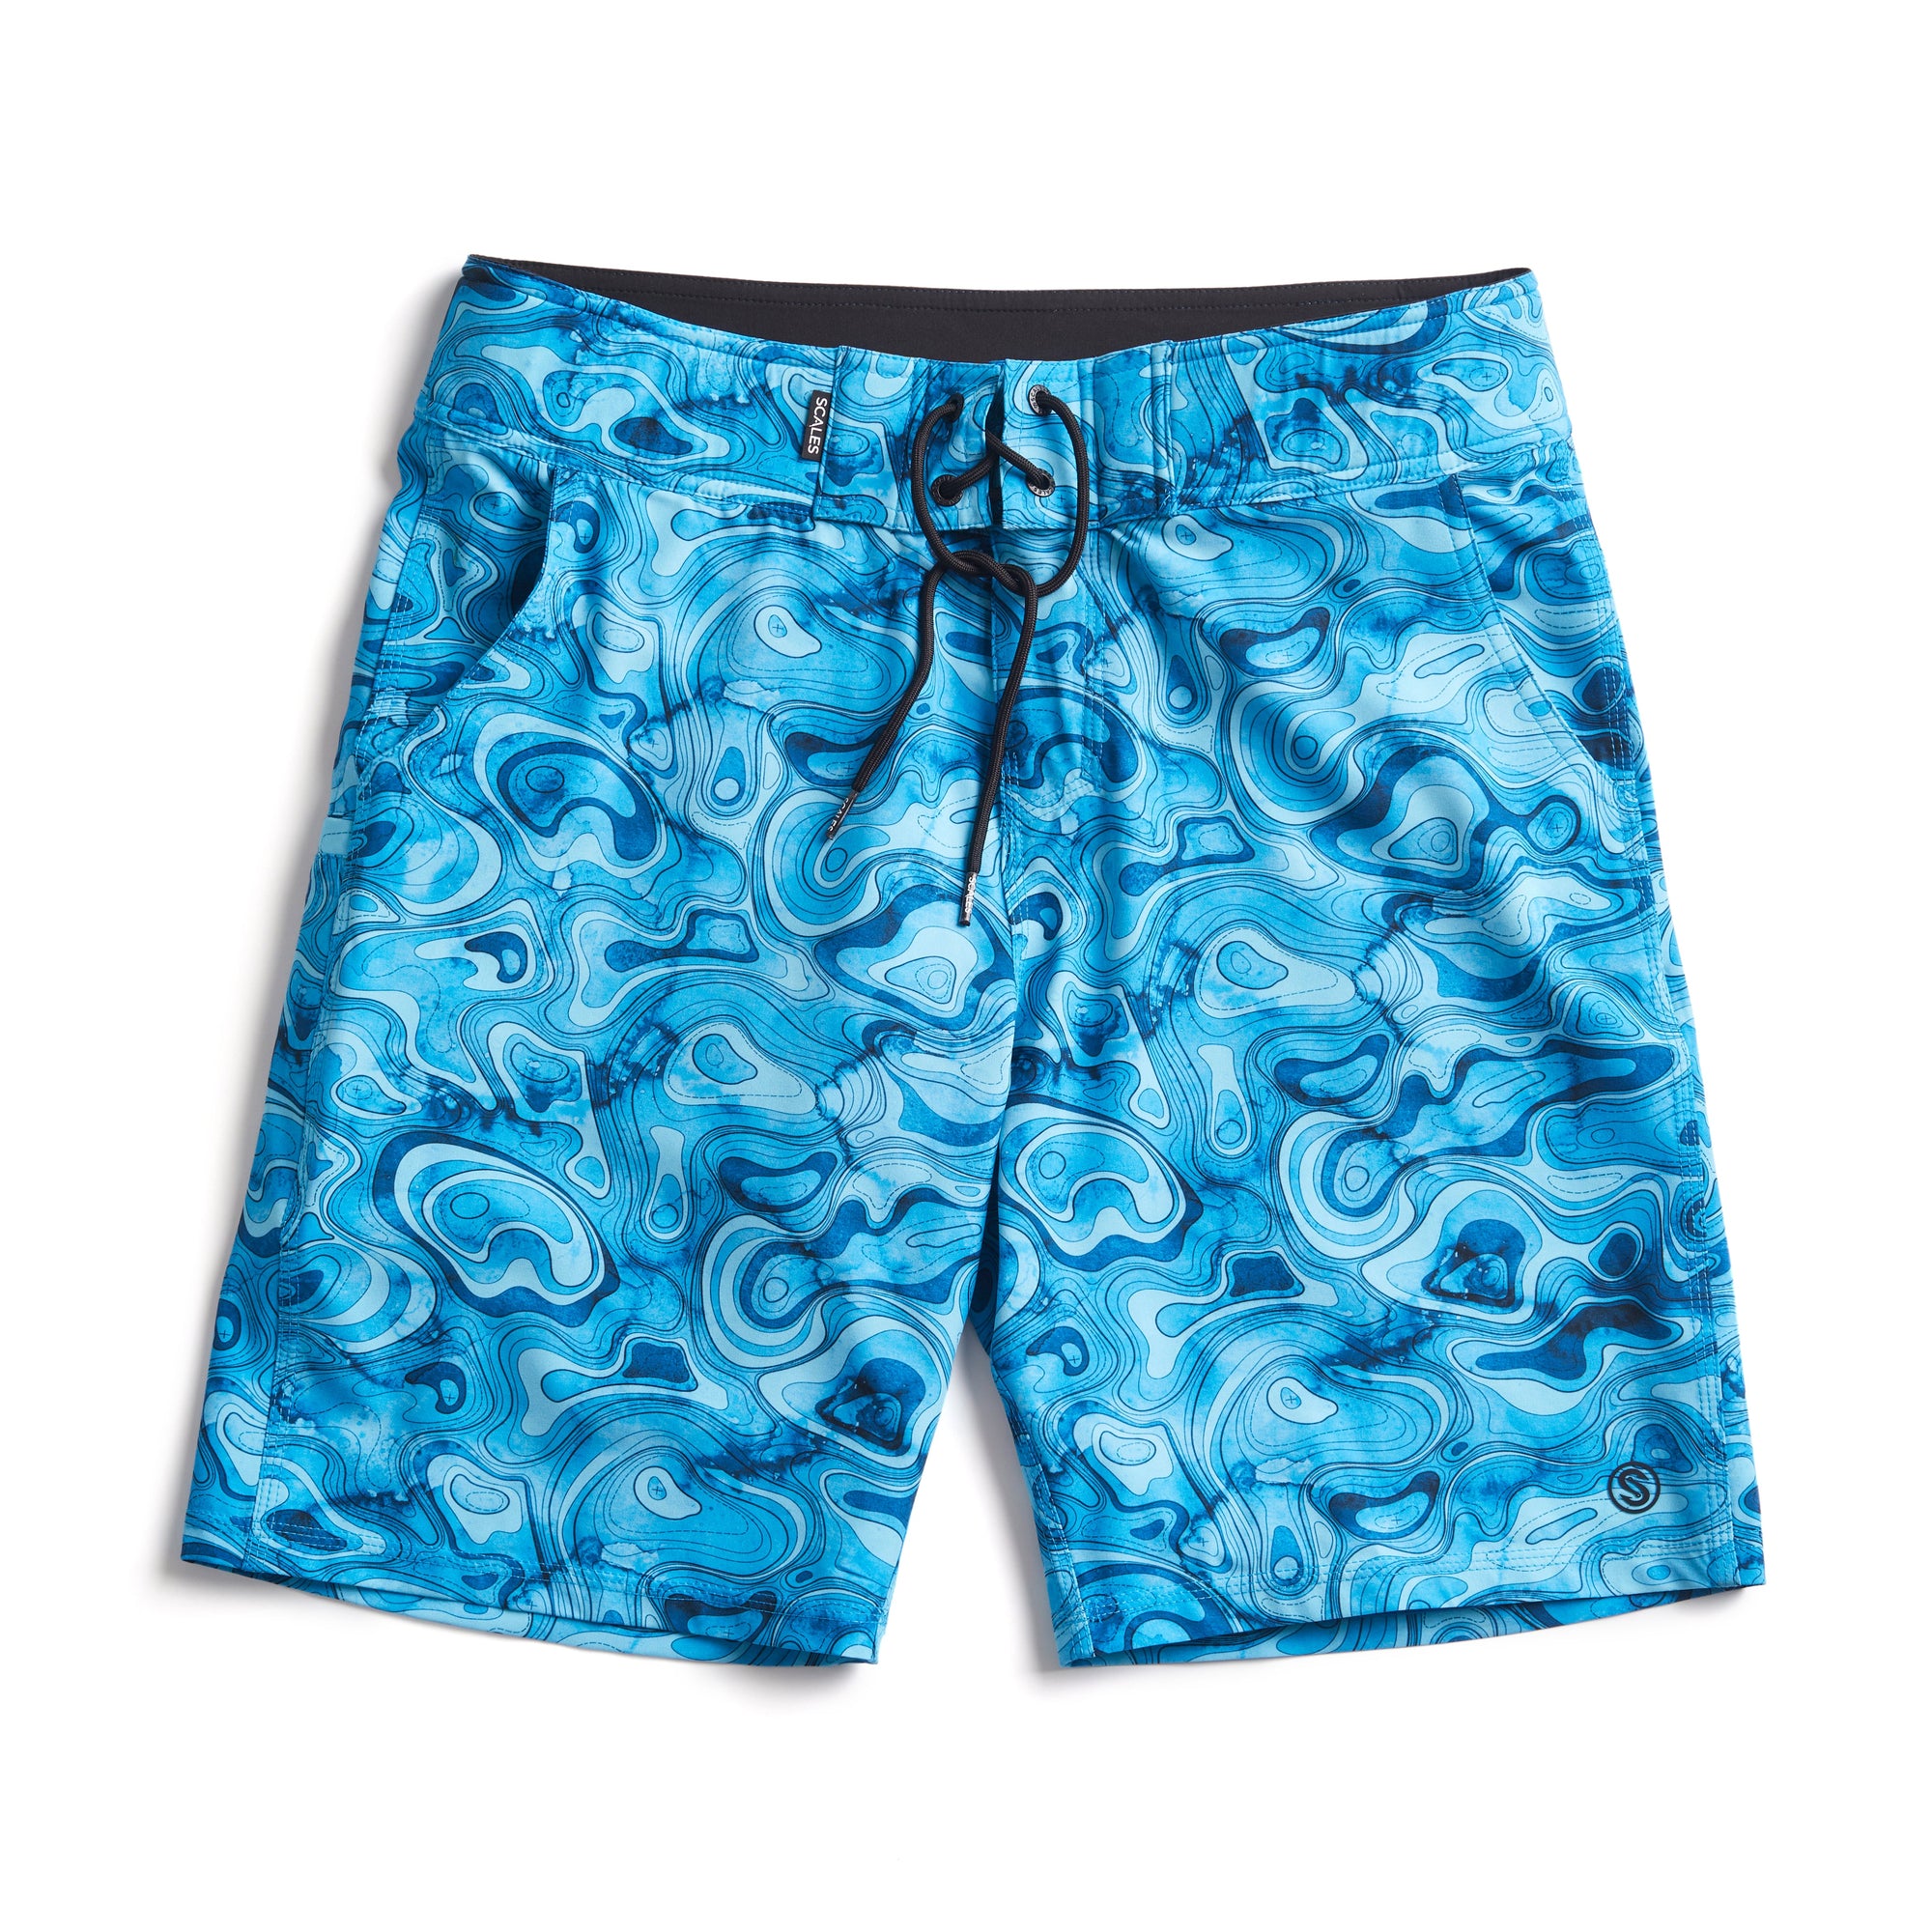 SCALES Topo First Mates Boardshorts